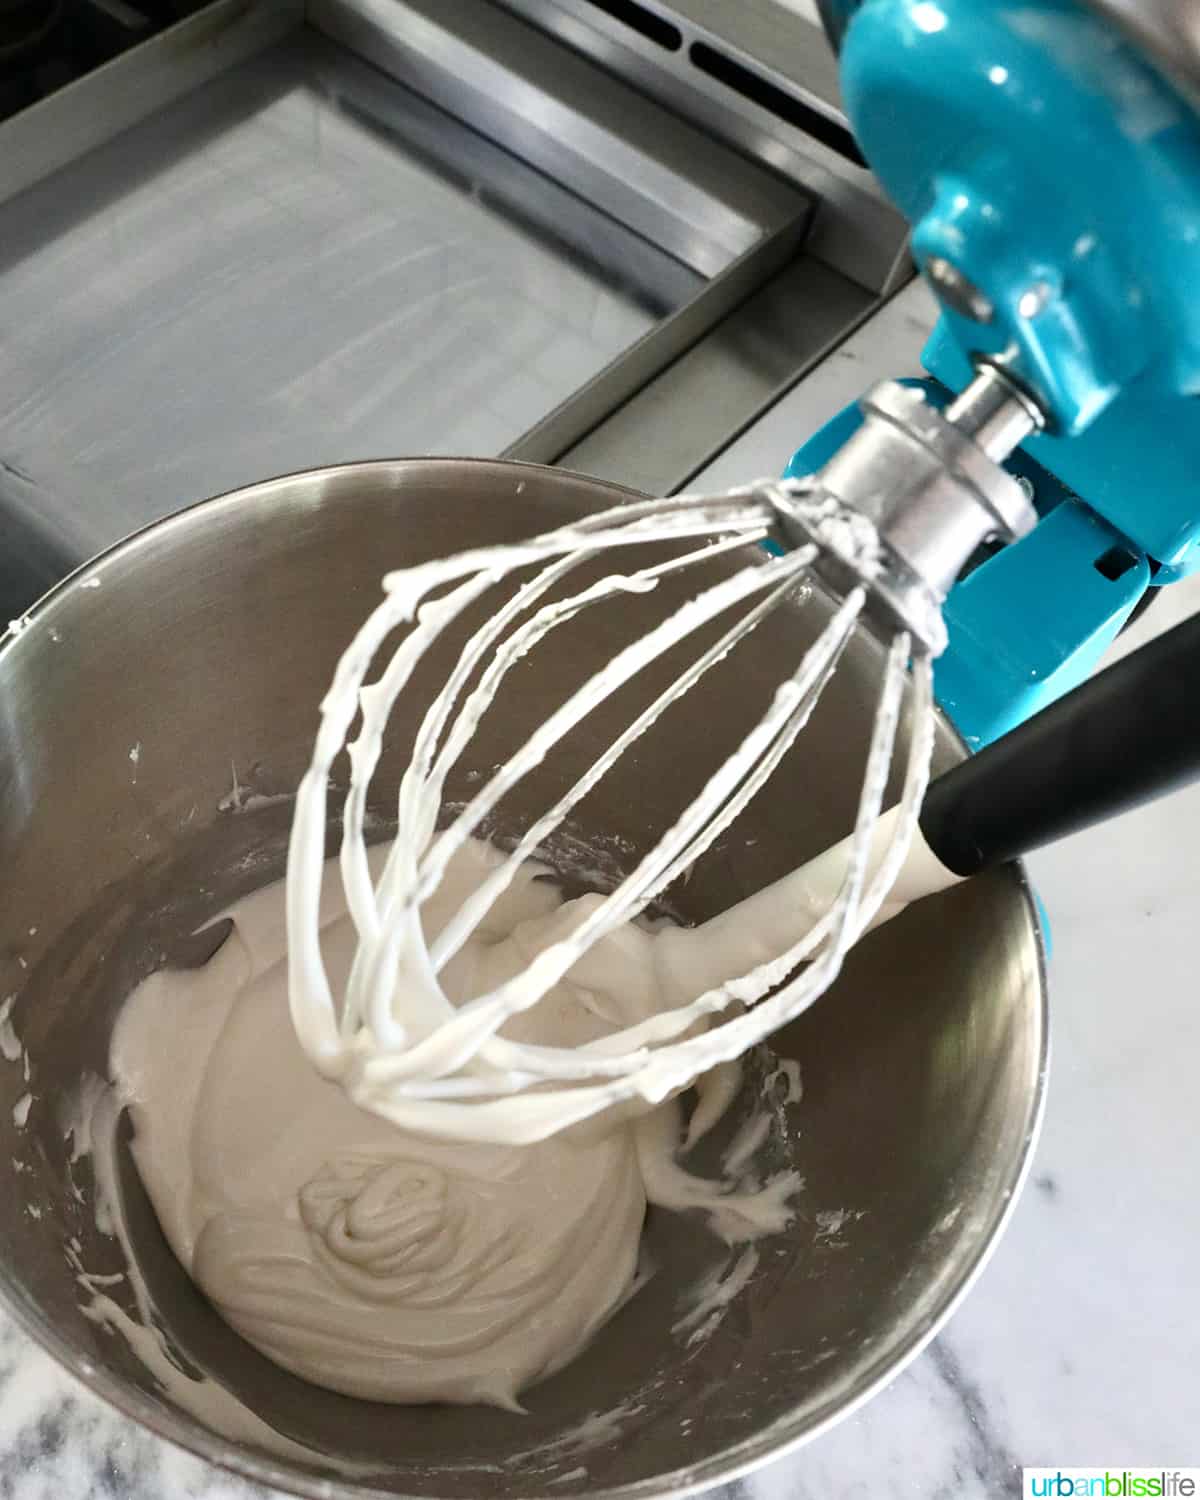 royal icing done mixing in a stand mixer.